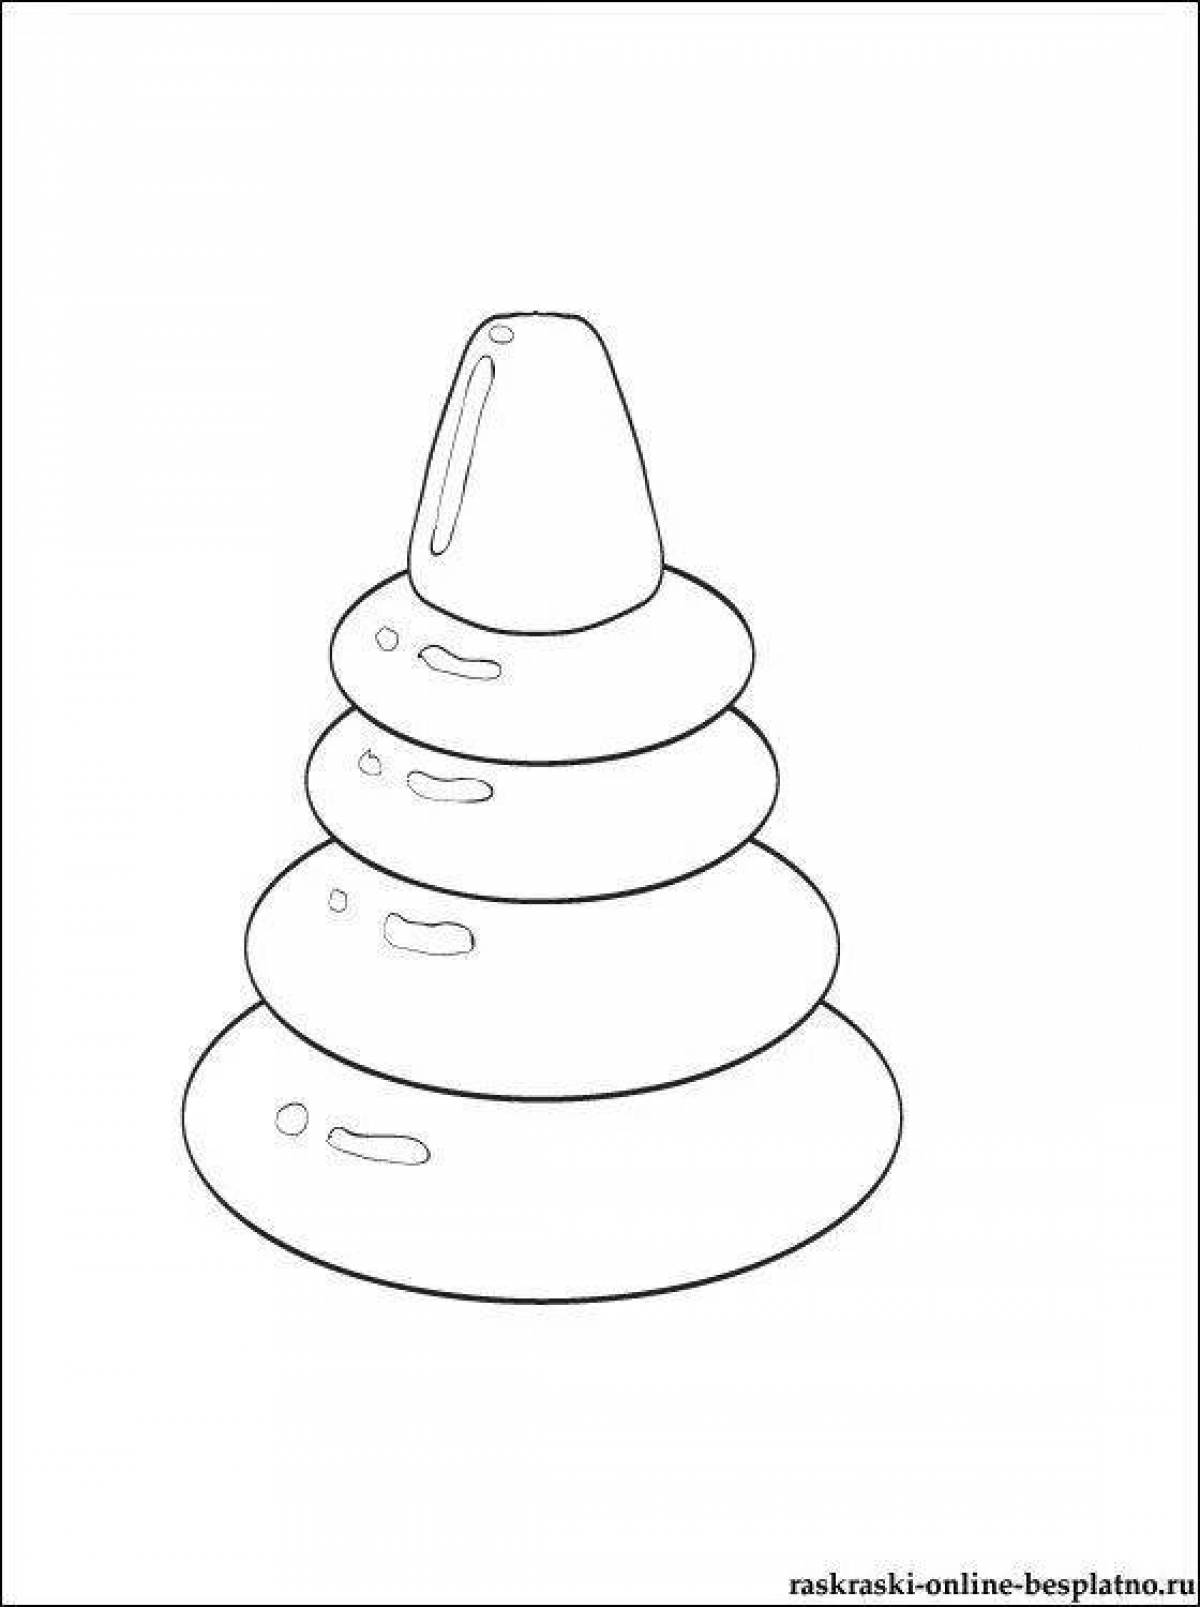 A fun pyramid coloring book for kids